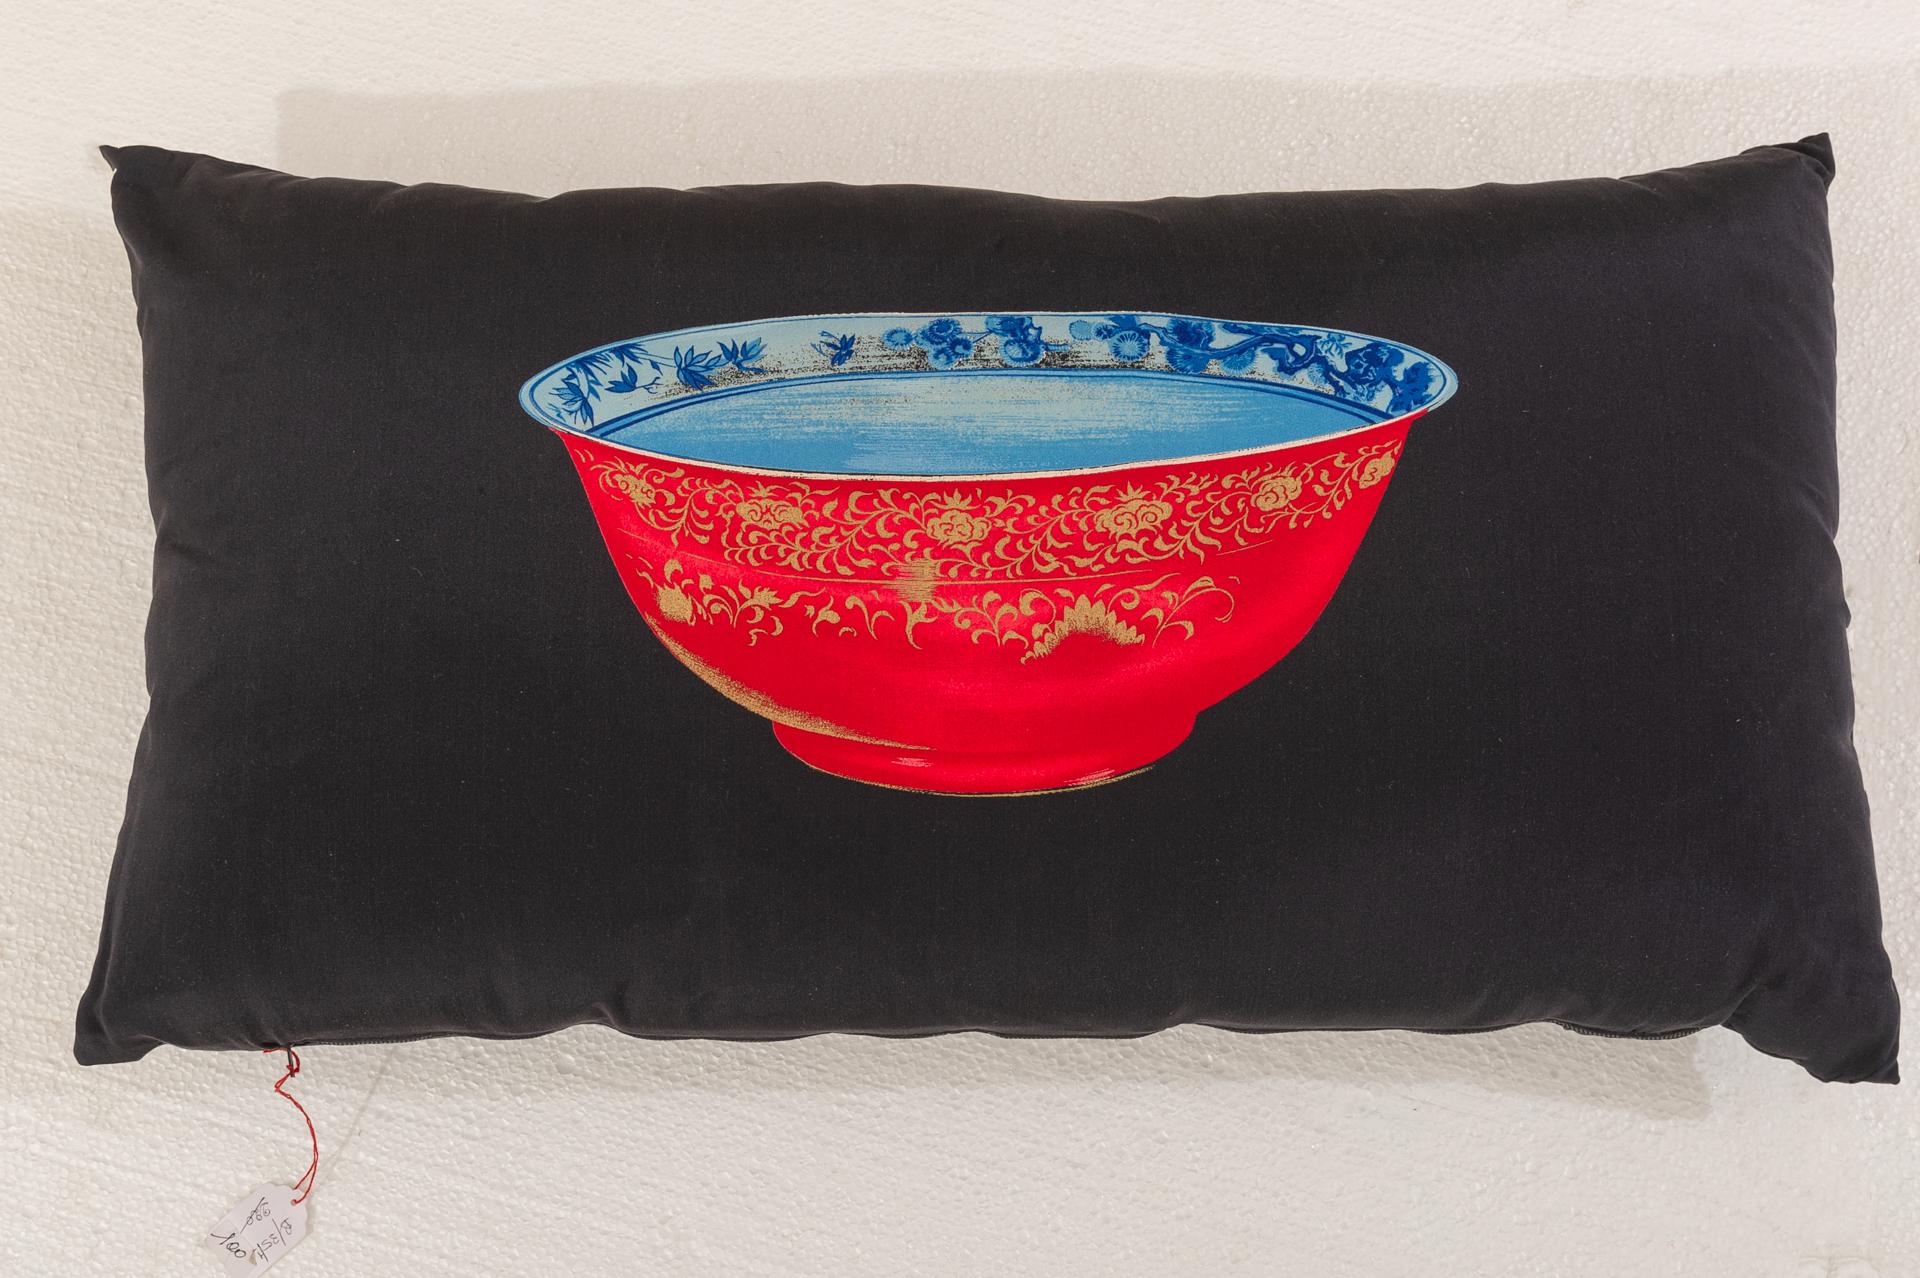 Refer. B/35 - 1 - 
Silk cushion in horizontal stripe with an elegant Chinese bowl, designed by Italian architect Giovanni Patrini.
I have another one, vertical size and other color, that I mounted in a red frame: it's published on 1stdibs 